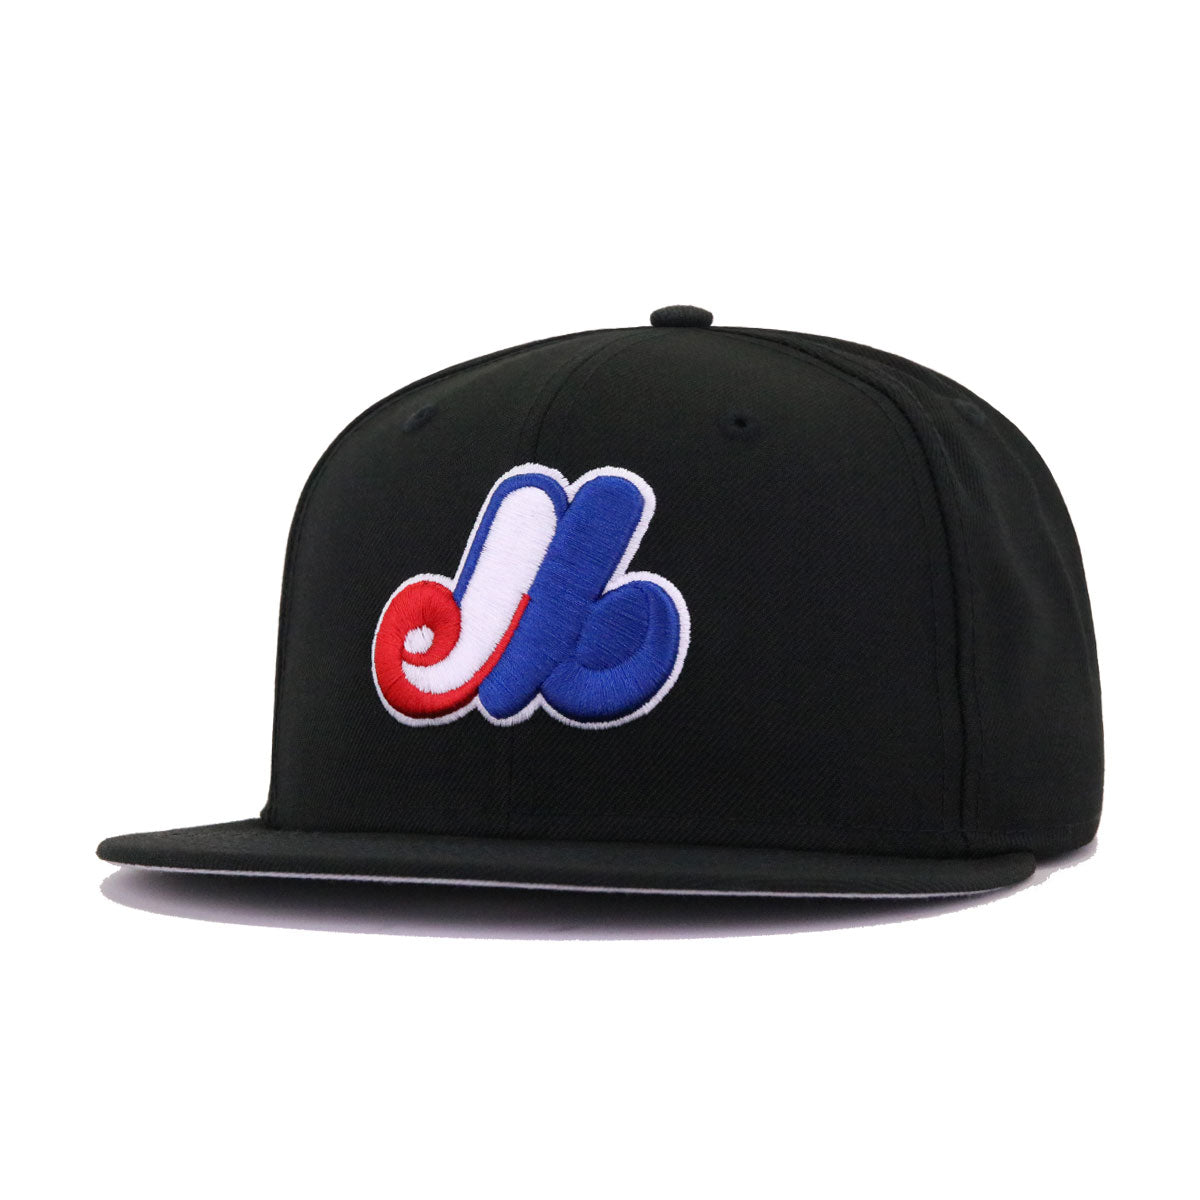 New Era Montreal Expos Cooperstown 59FIFTY Fitted Cap - White/RoyalBlue/Red